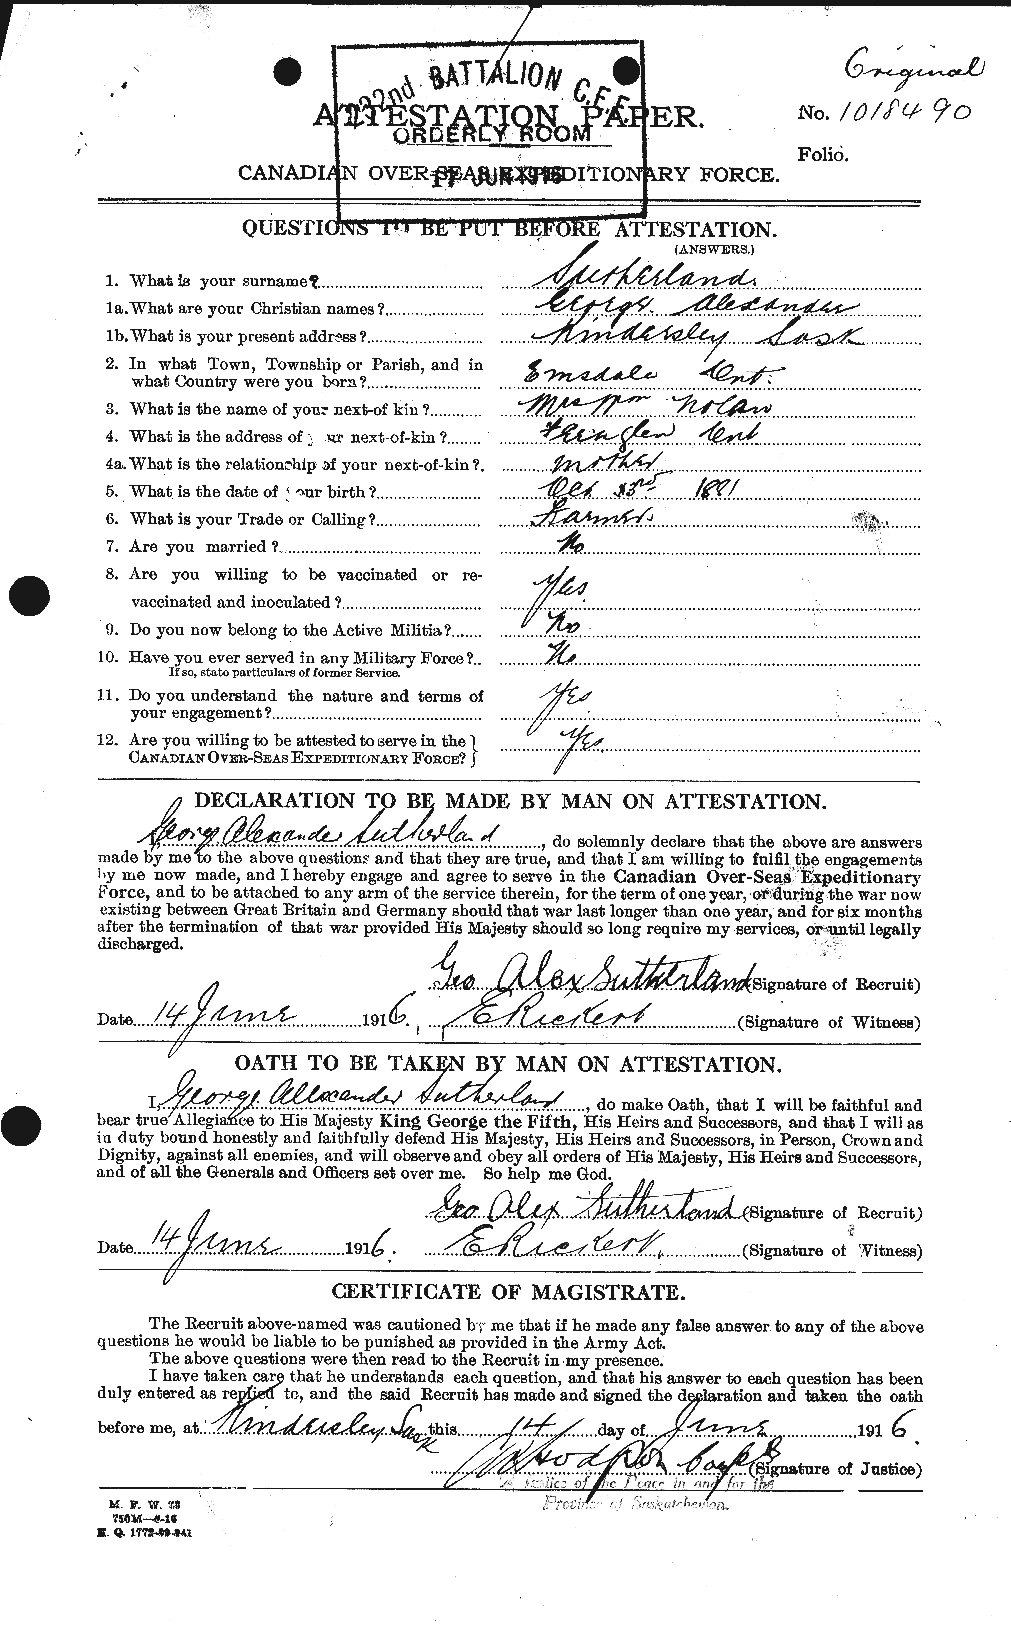 Personnel Records of the First World War - CEF 124854a